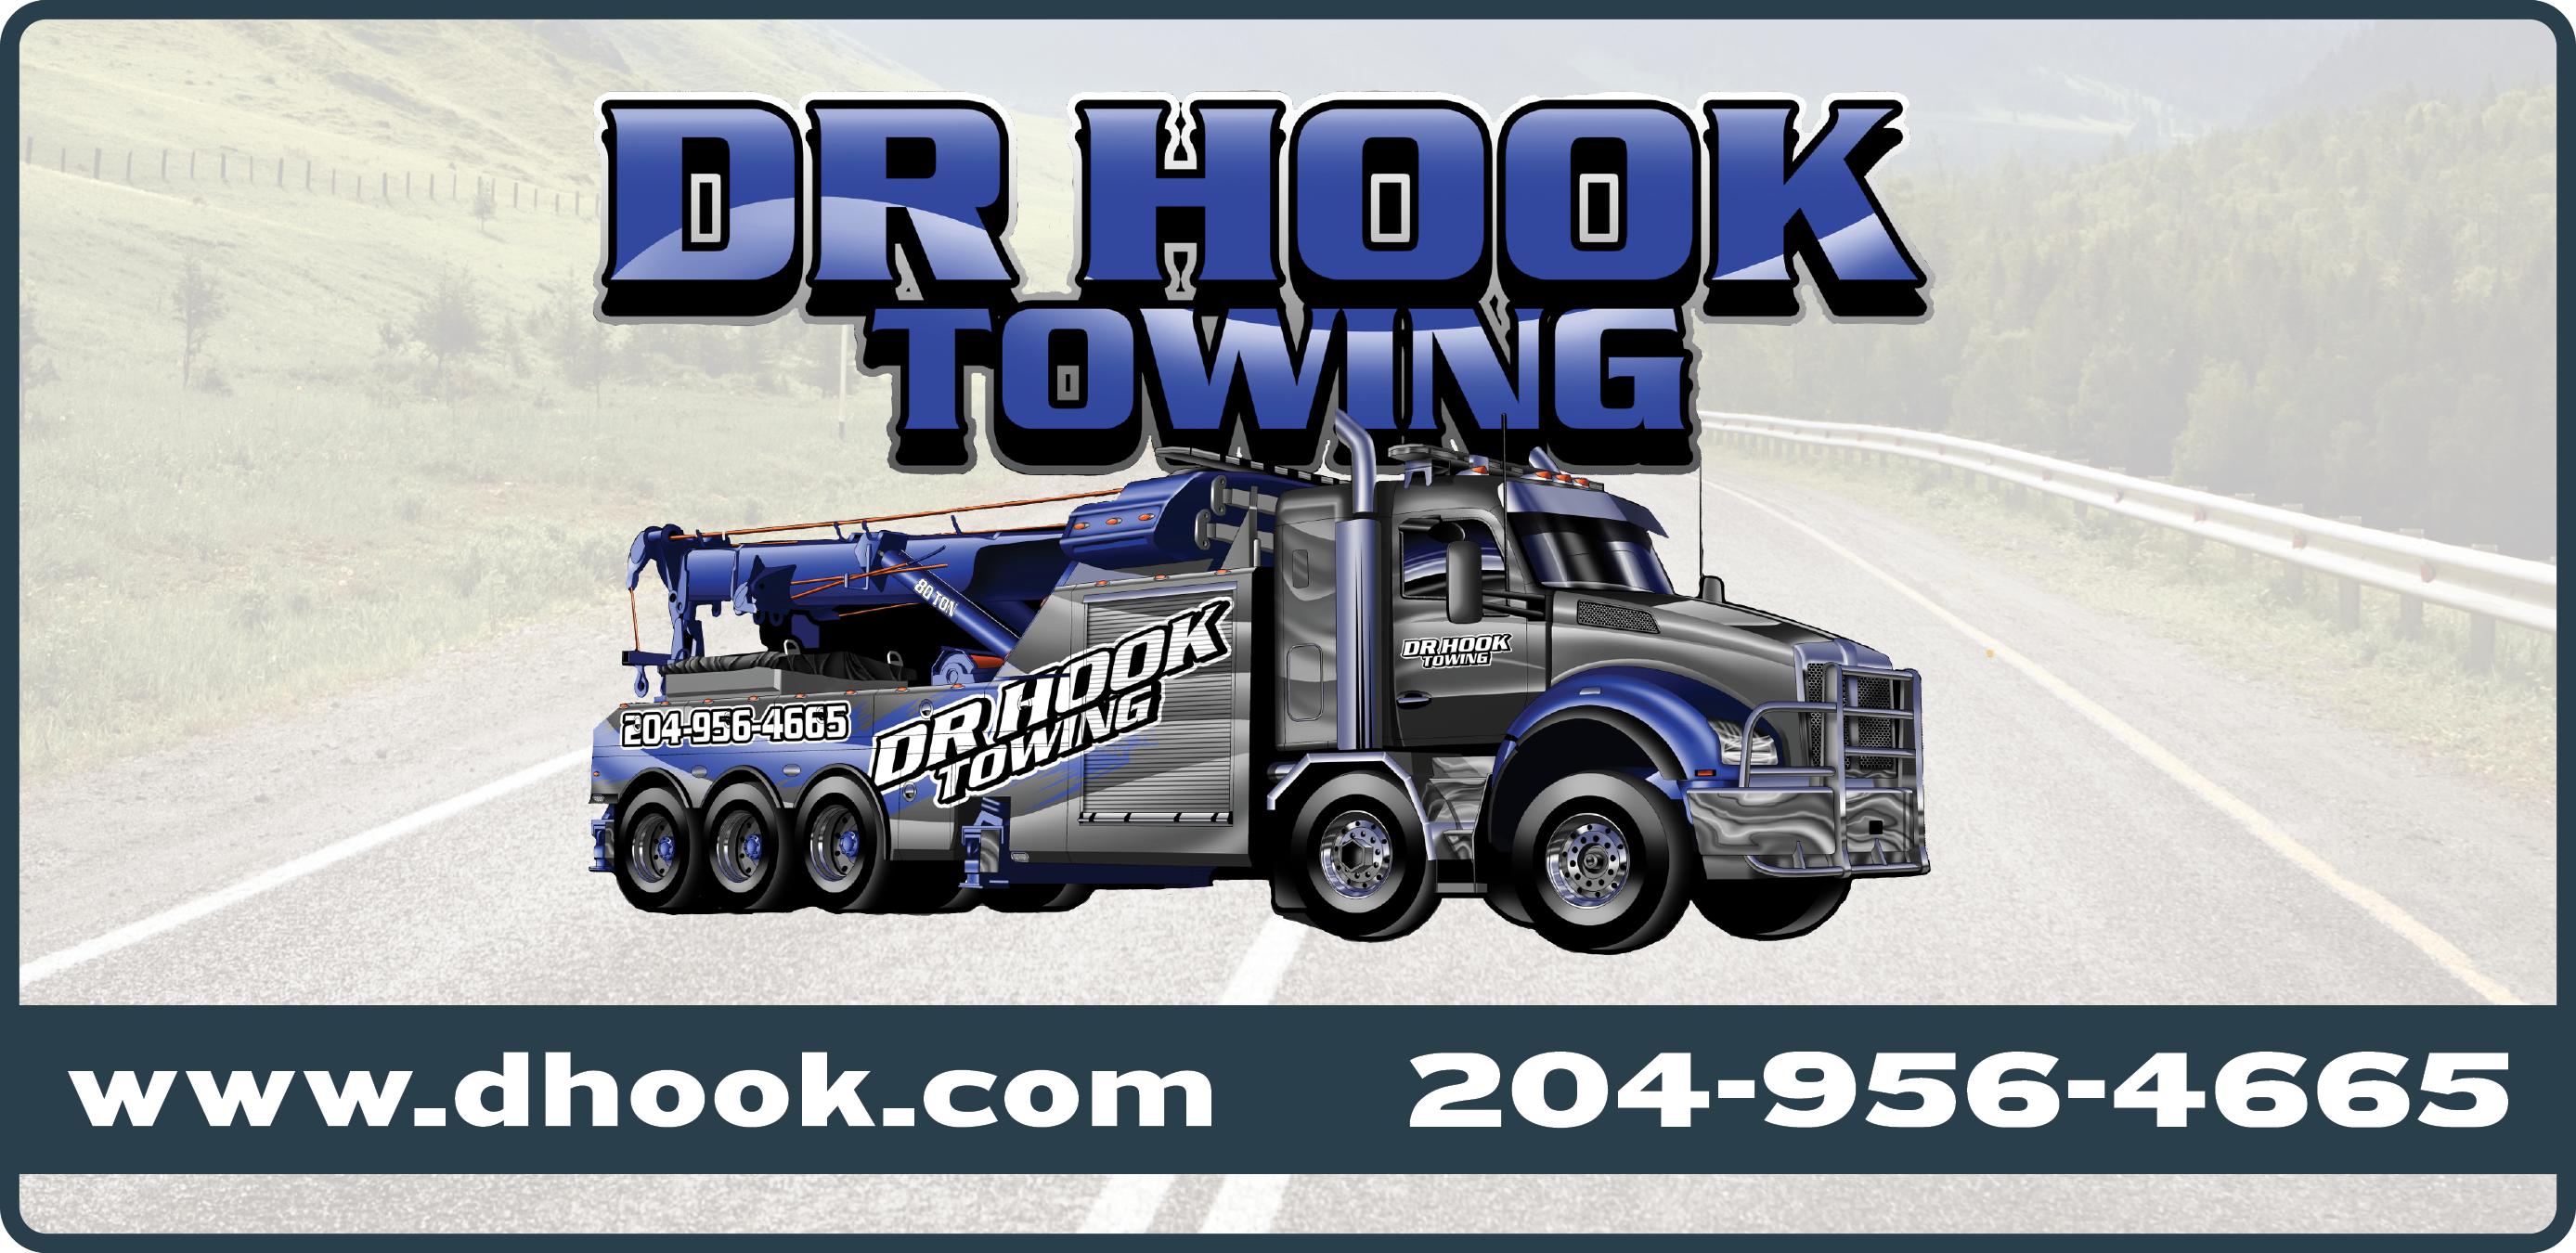 Dr. Hook Towing